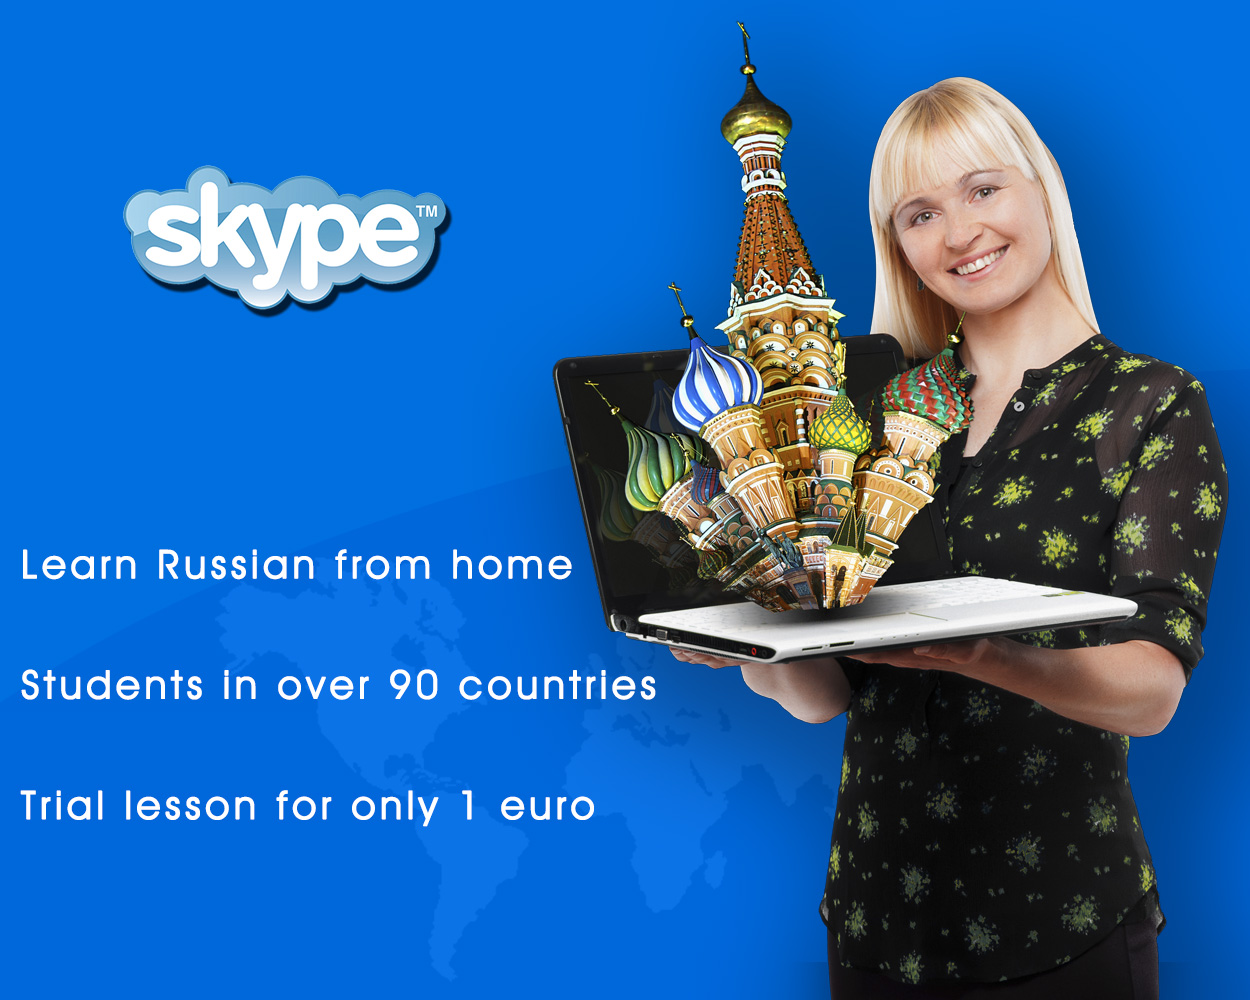 One-to-one Russian lessons